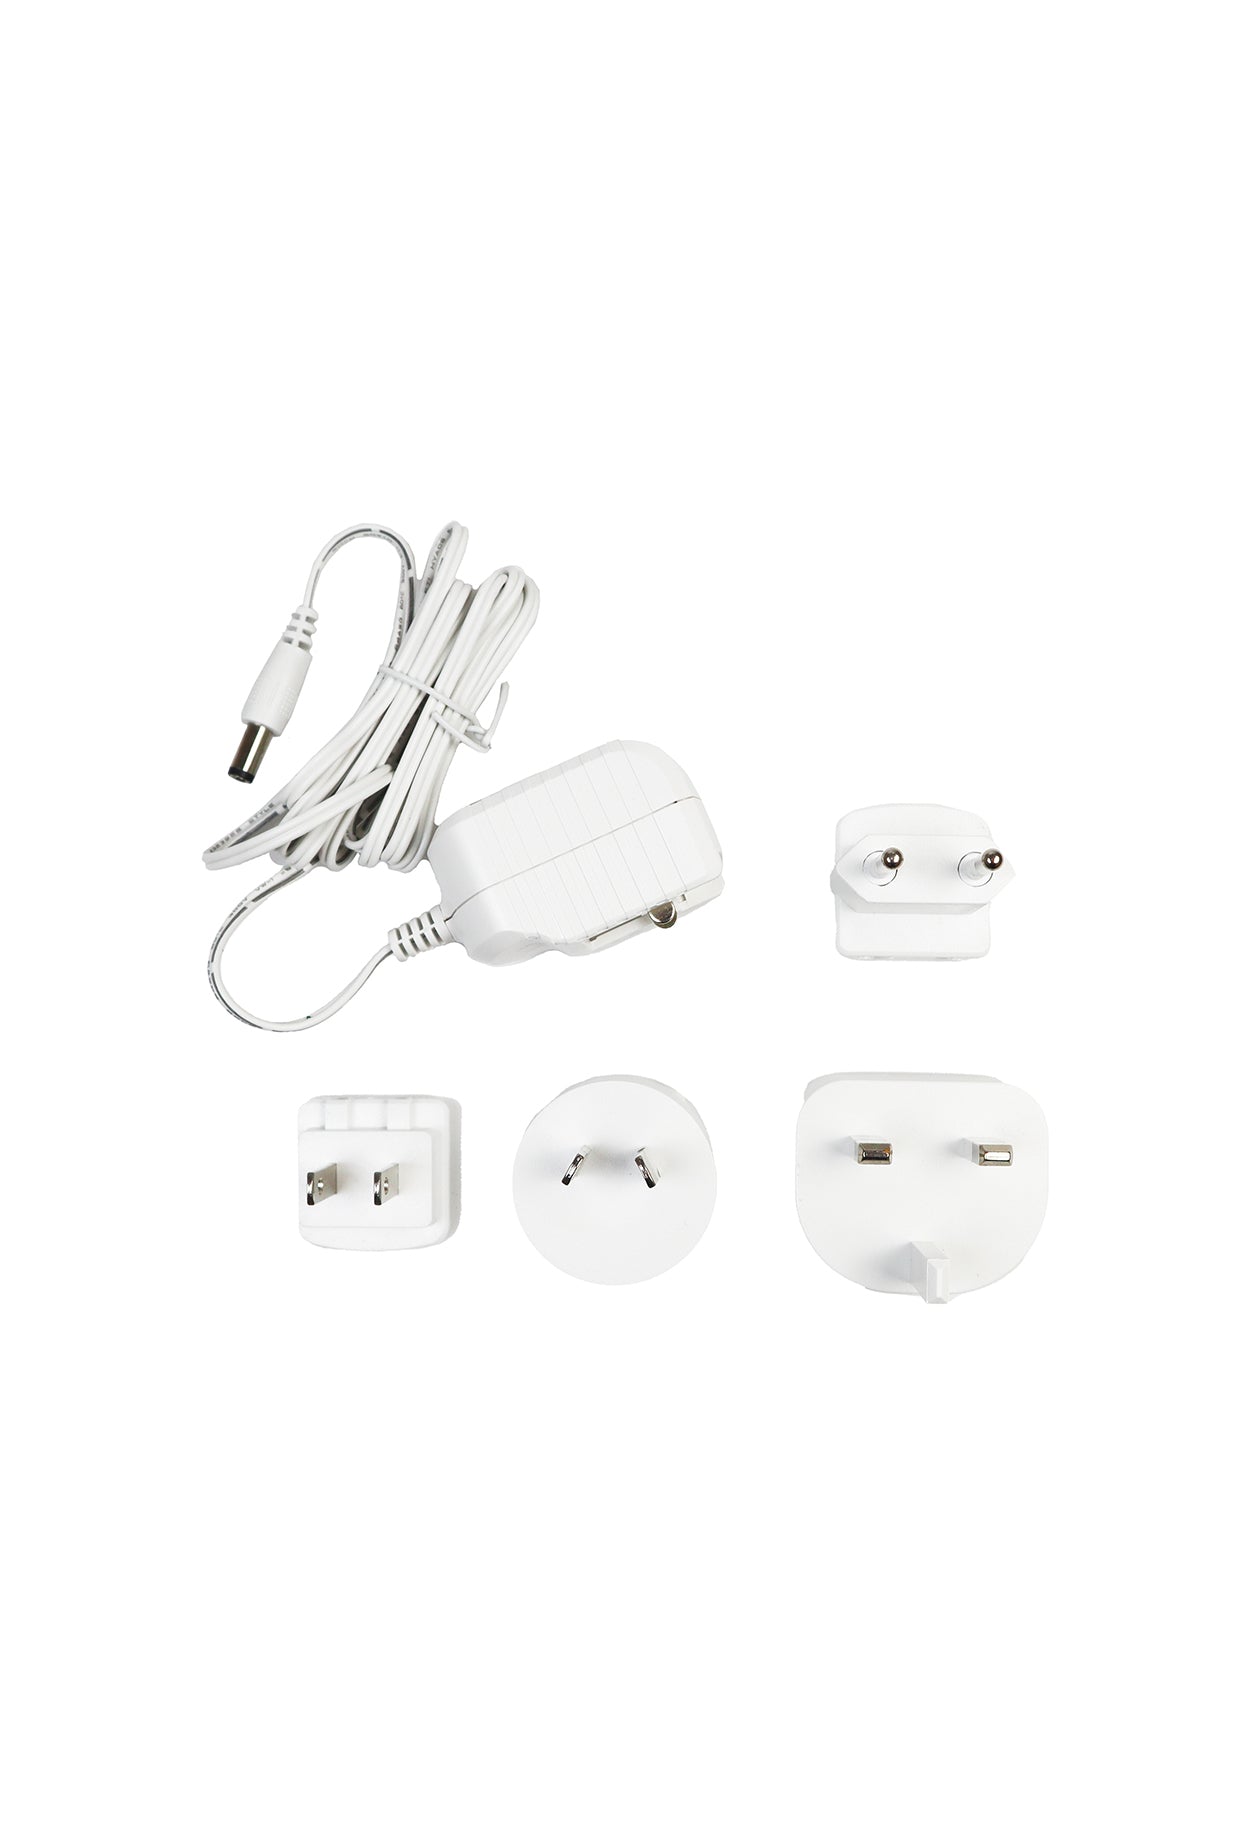 Universal AC Power Adapter for Villa and Weekend toilets